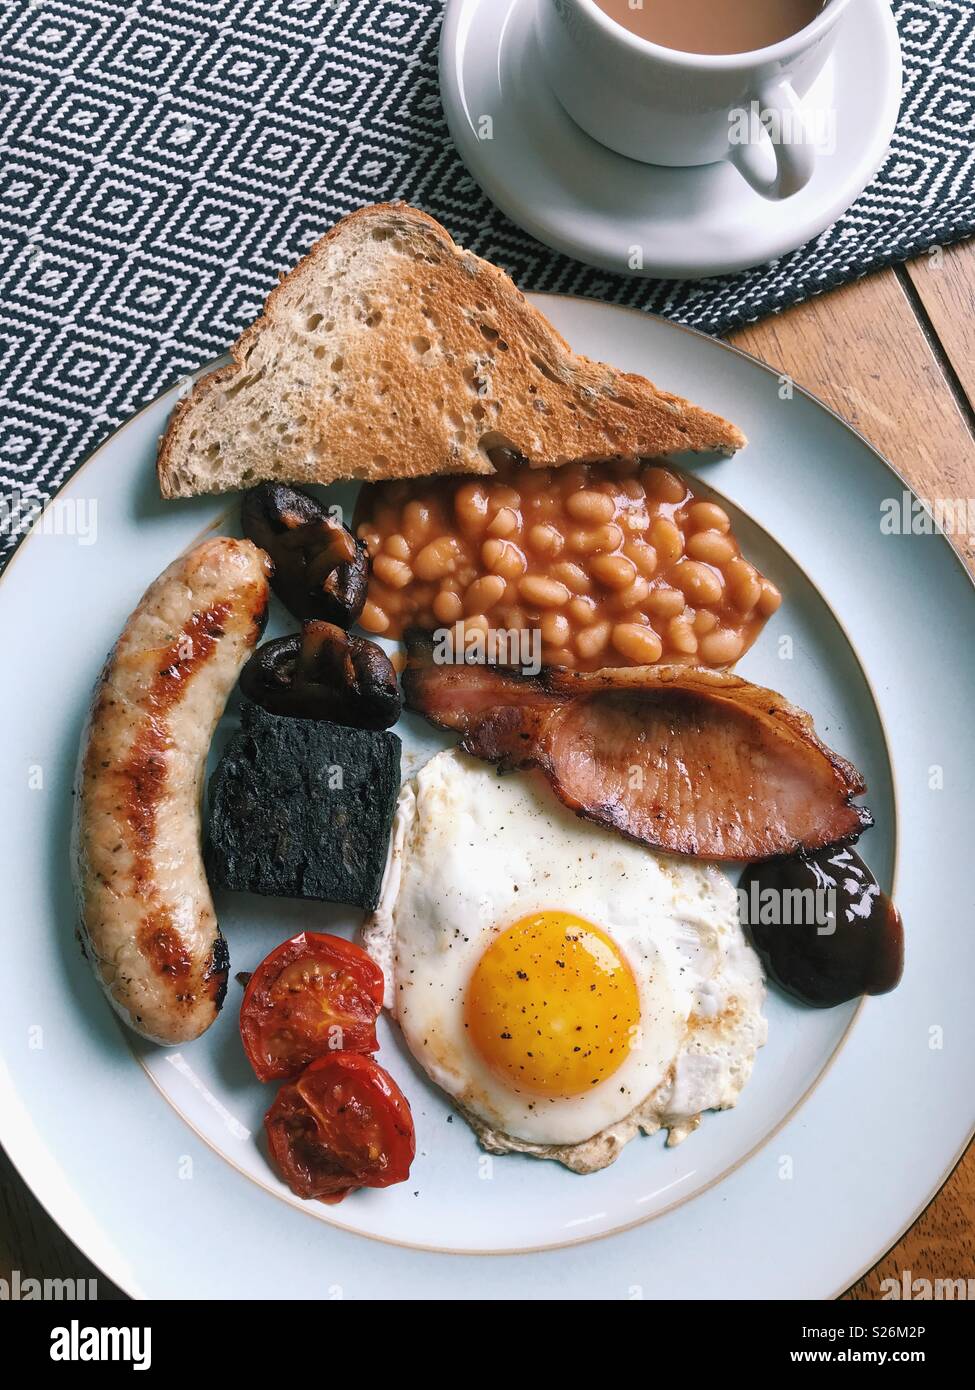 Overhead view of a homemade full English breakfast, with sausage, tomatoes, black pudding, mushrooms, baked beans, toast, brown sauce, a fried egg, and a cup of tea. Stock Photo